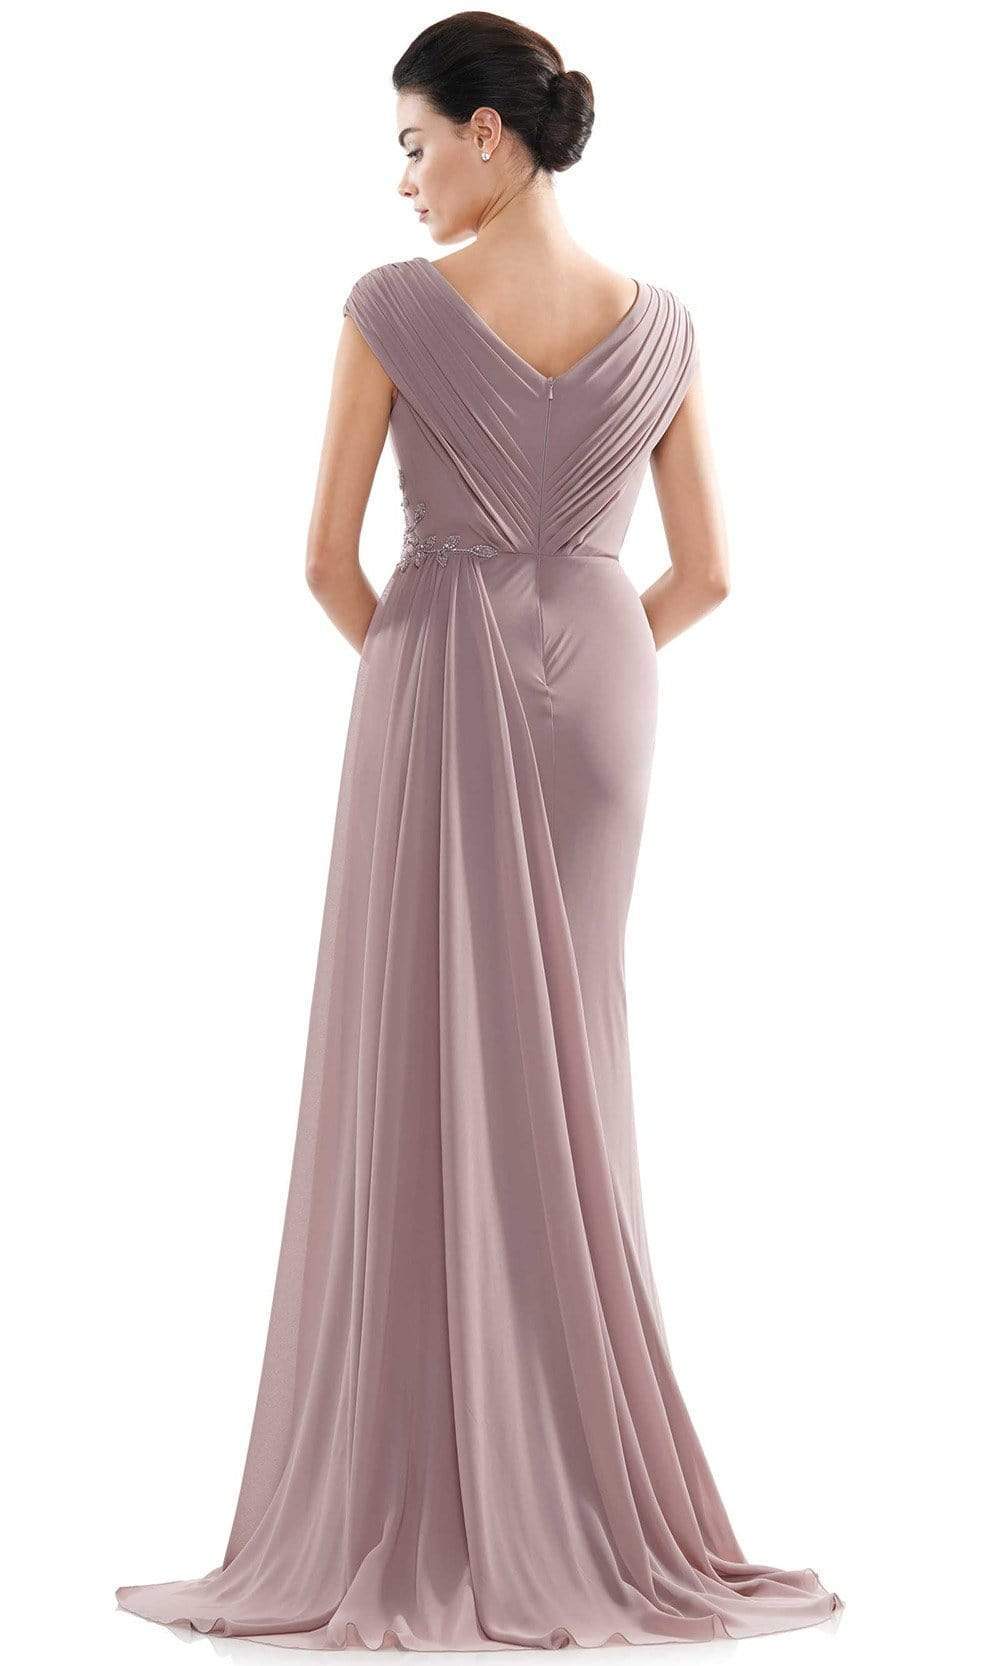 Marsoni by Colors - MV1080 Cap Sleeve Foliage Beaded Sheath Gown Mother of the Bride Dresses